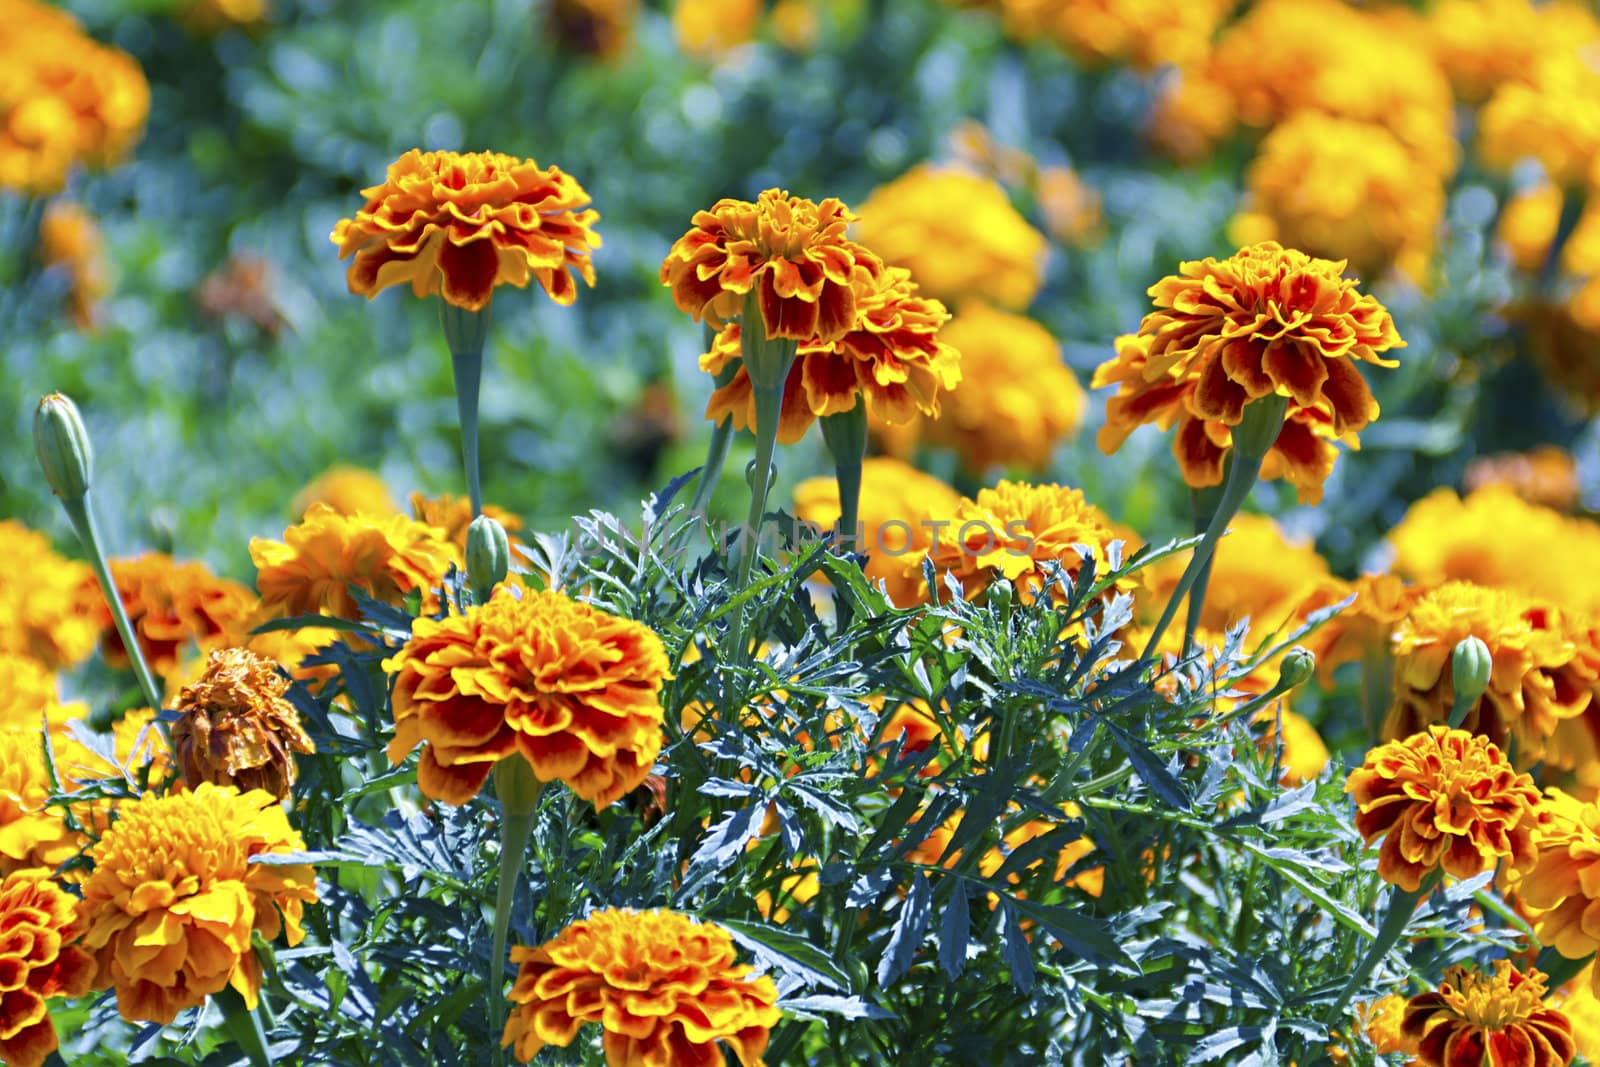 Tagetes flower on a bed by Plus69